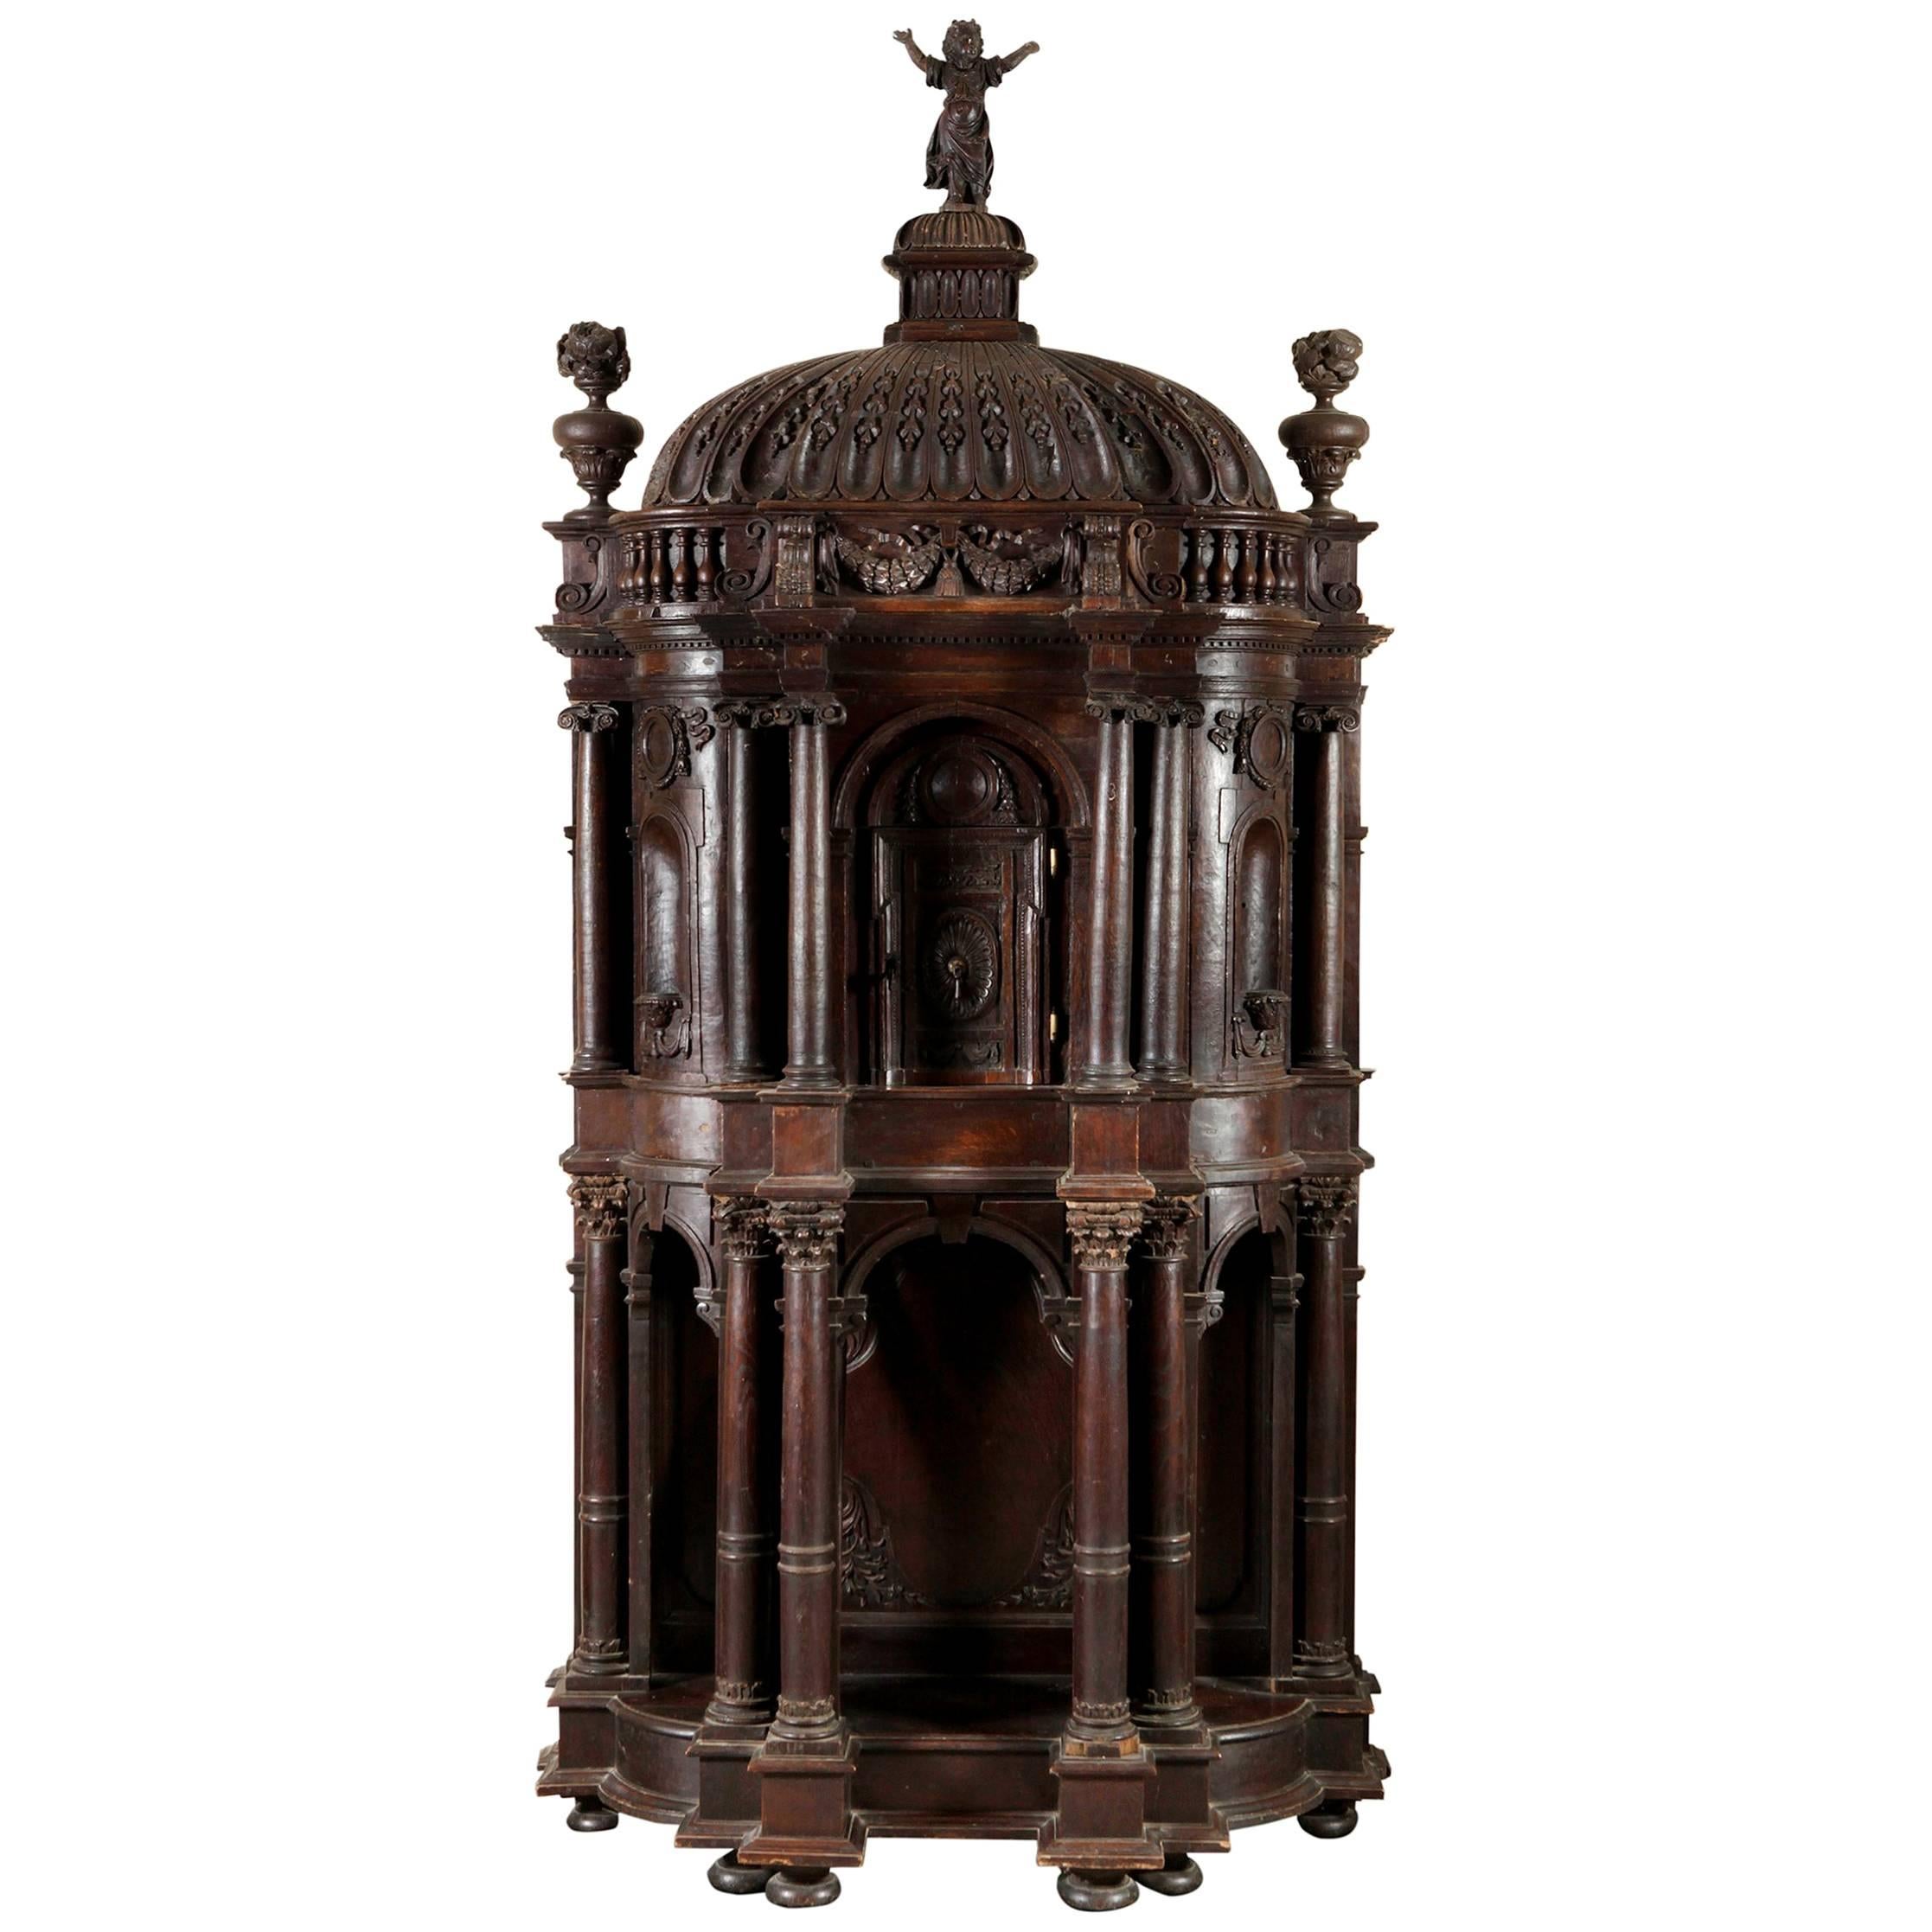 Architectural Tabernacle, Oak Wood, Spain, 17th Century